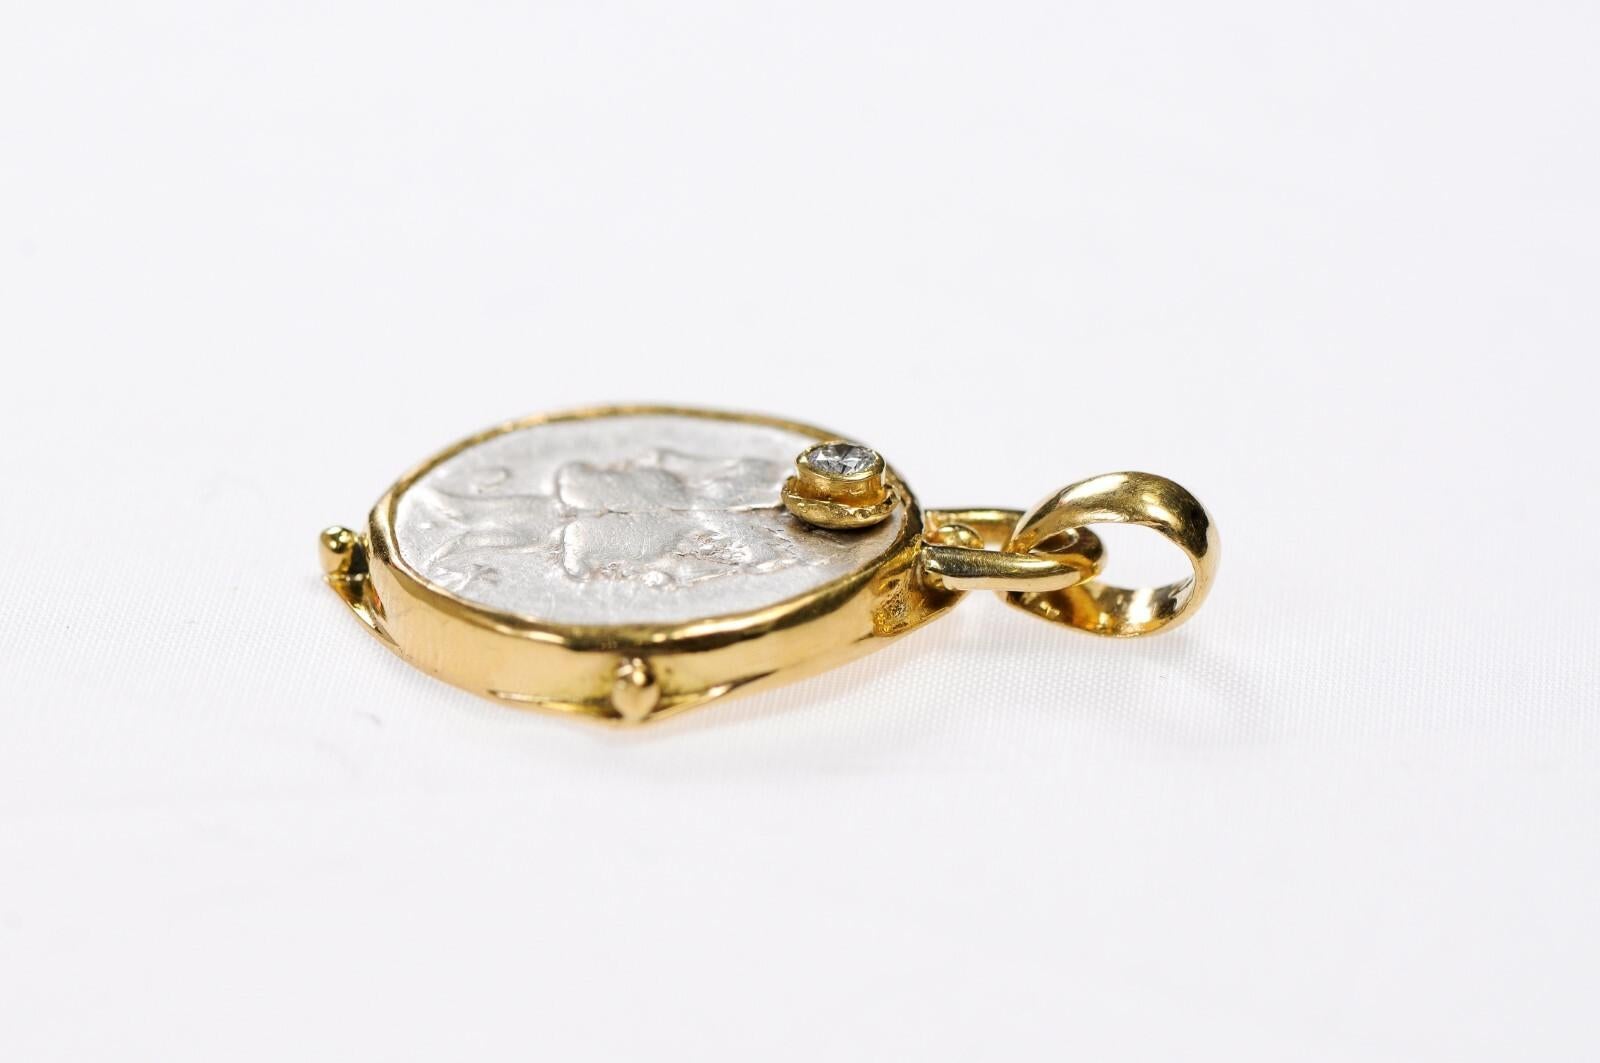 Janus Coin Pendant w/Diamond and 22k gold For Sale 2